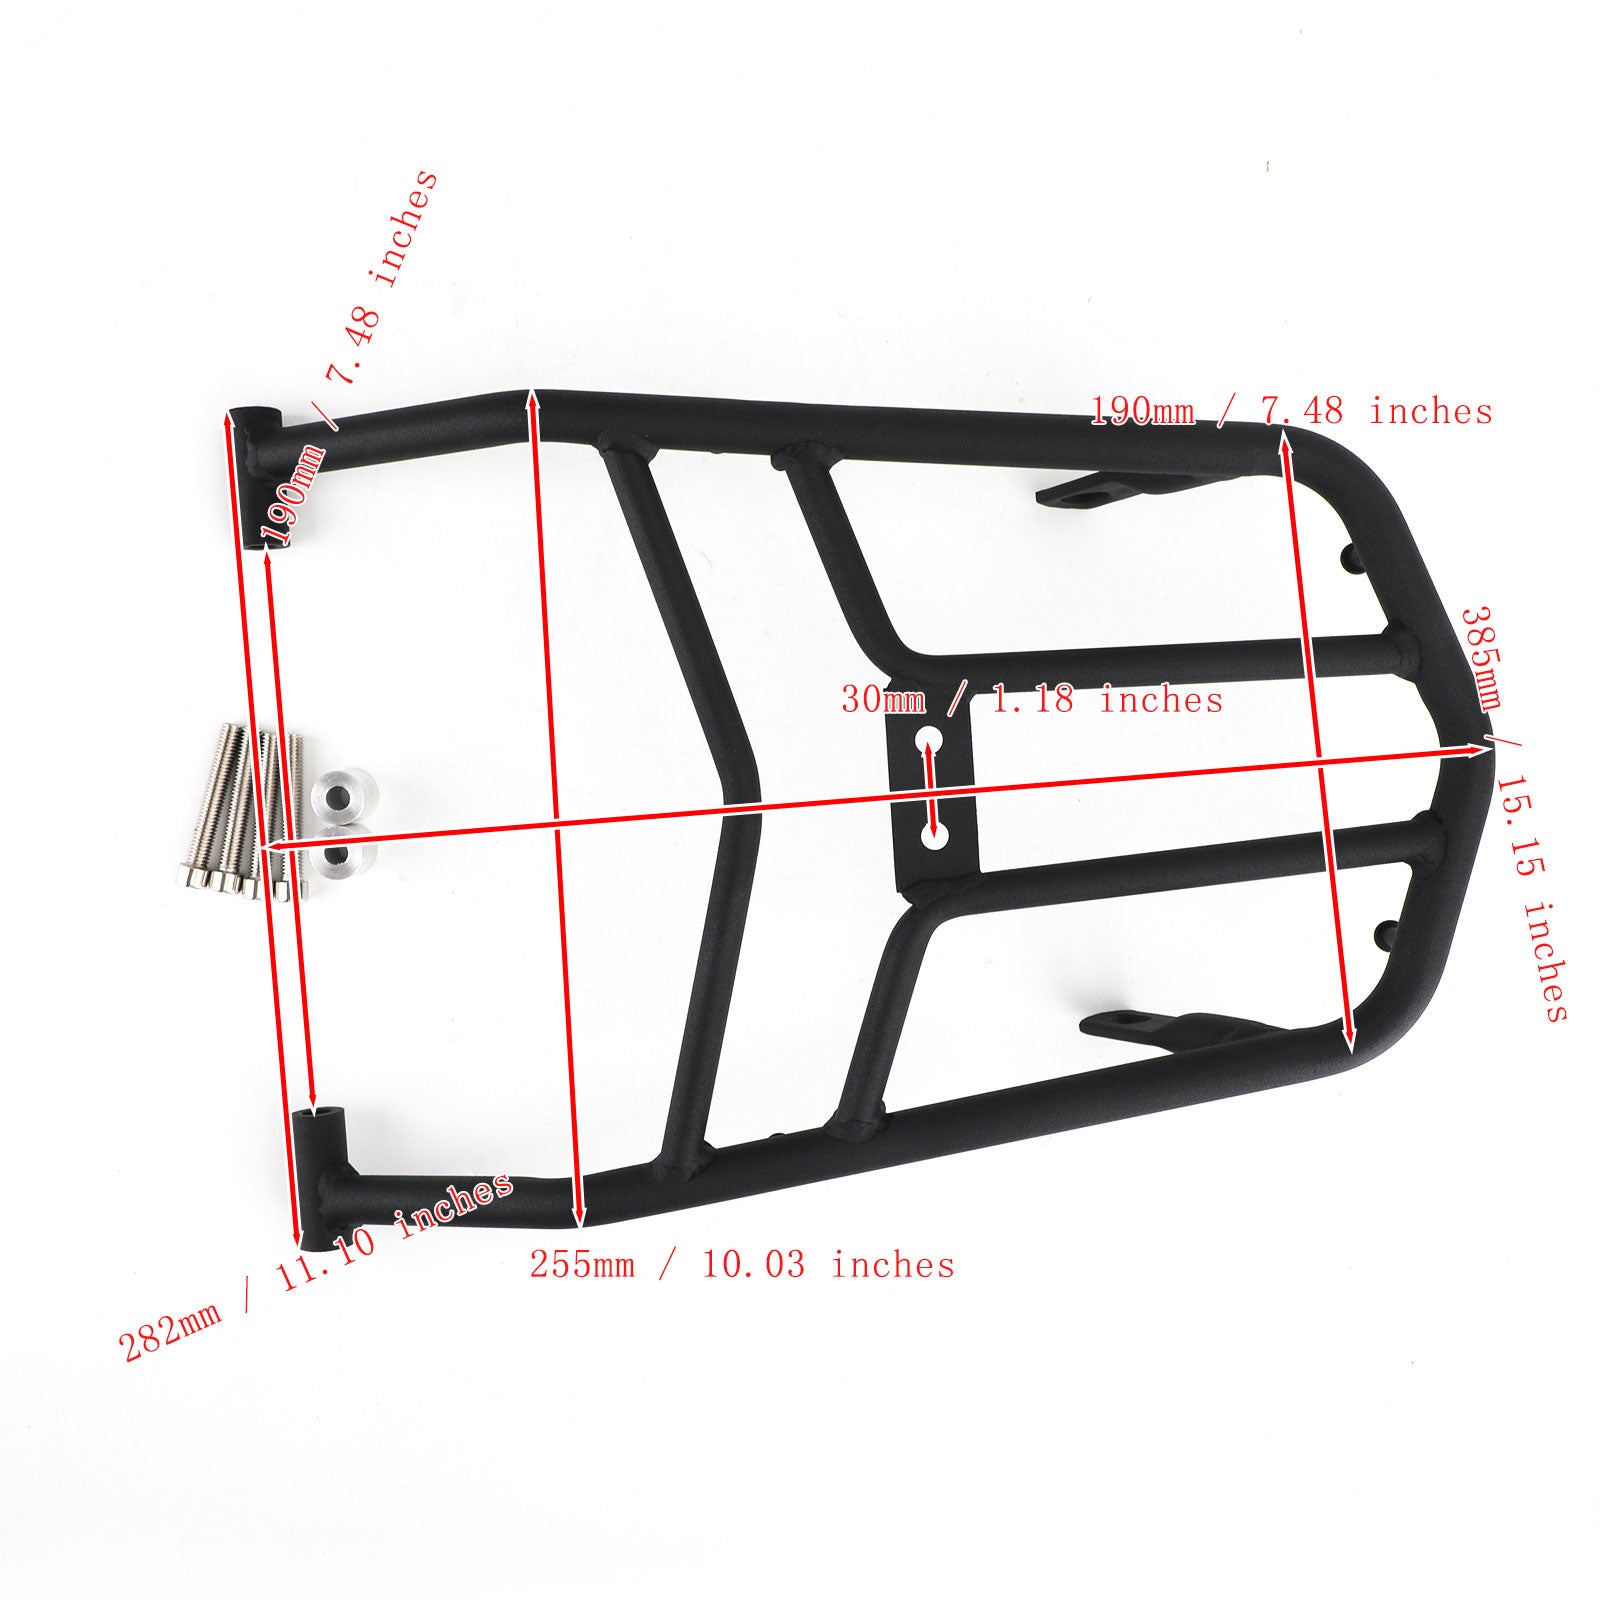 Rear Cargo Luggage Rack Carrier Fit for Honda CRF250 L/M CRF250 Rally 2012-2020